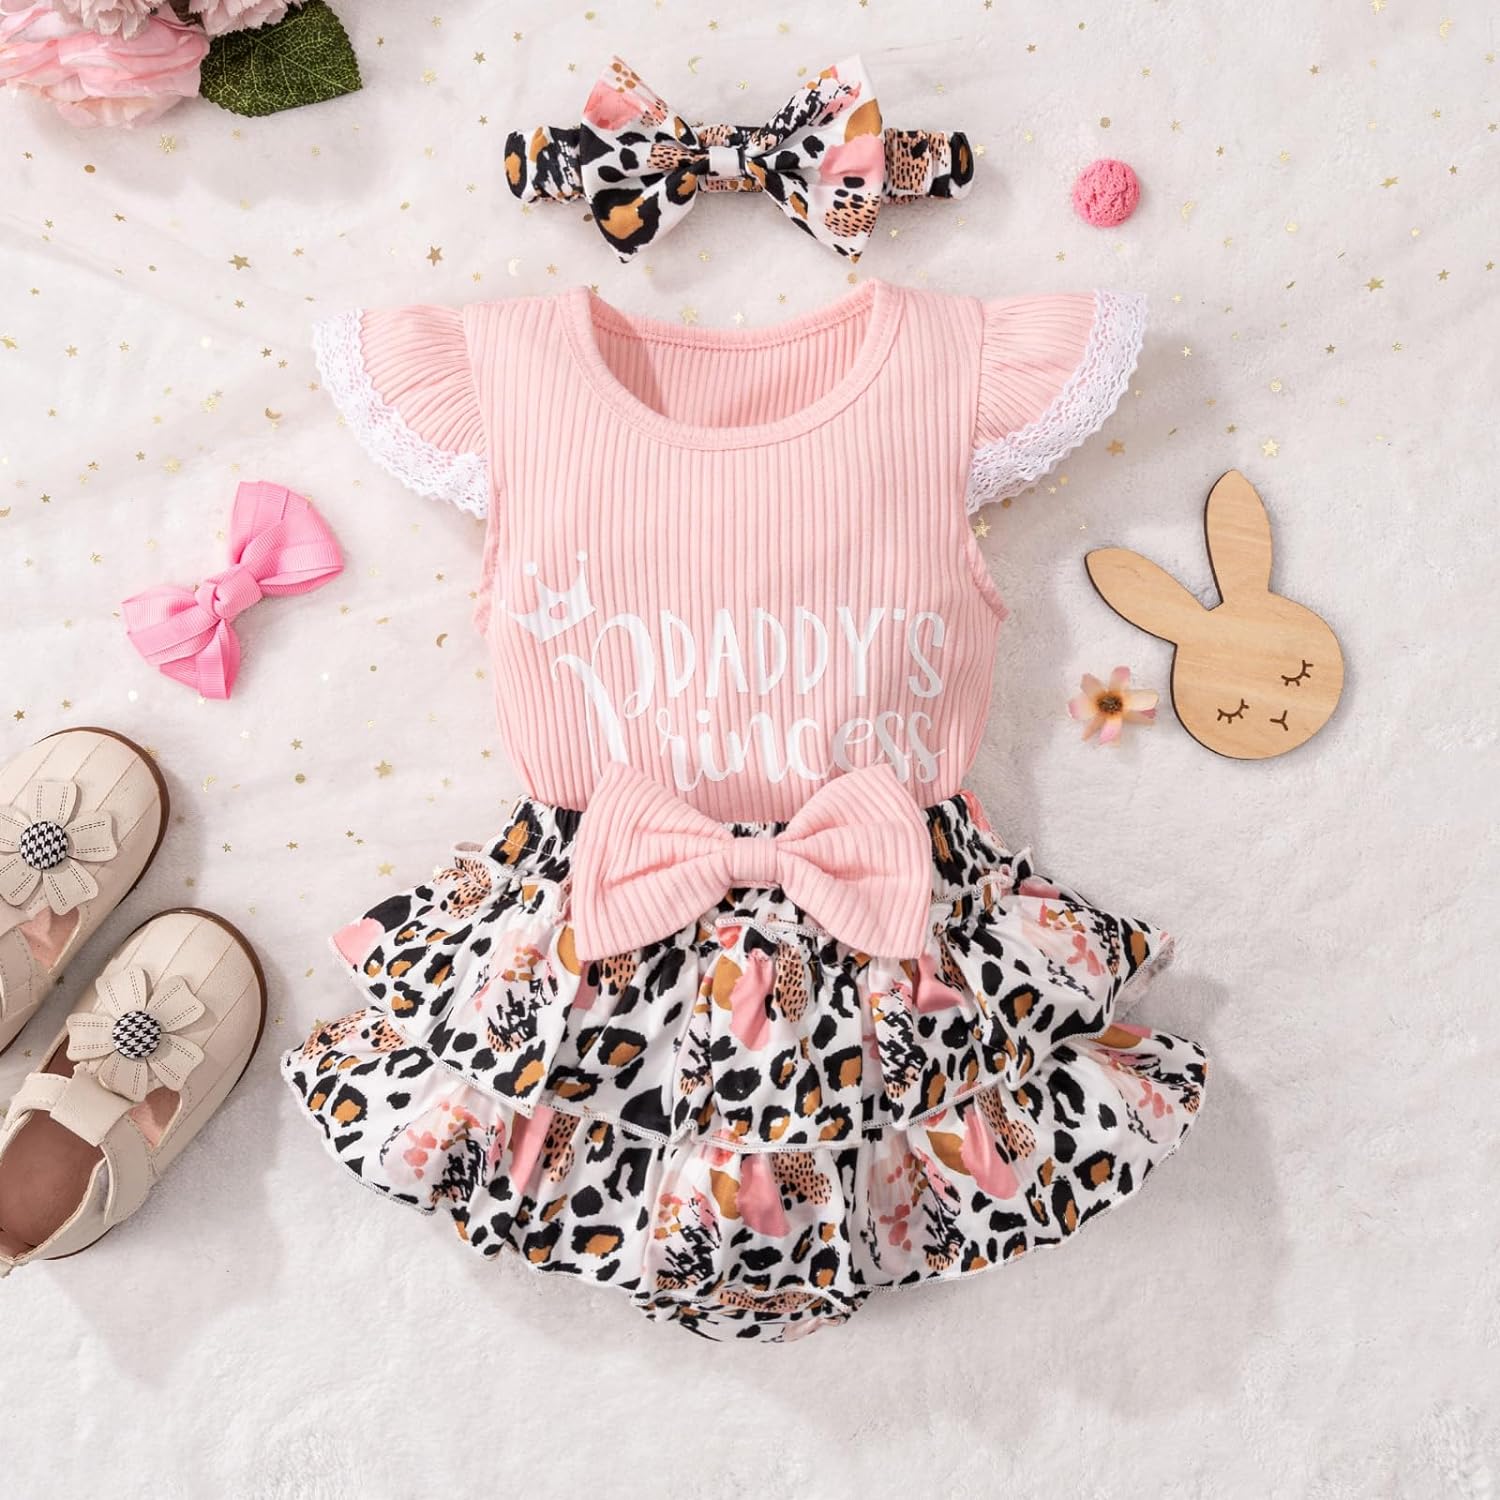 3PCS Daddy's Princess Letter Printed Sleeveless Baby Romper Set